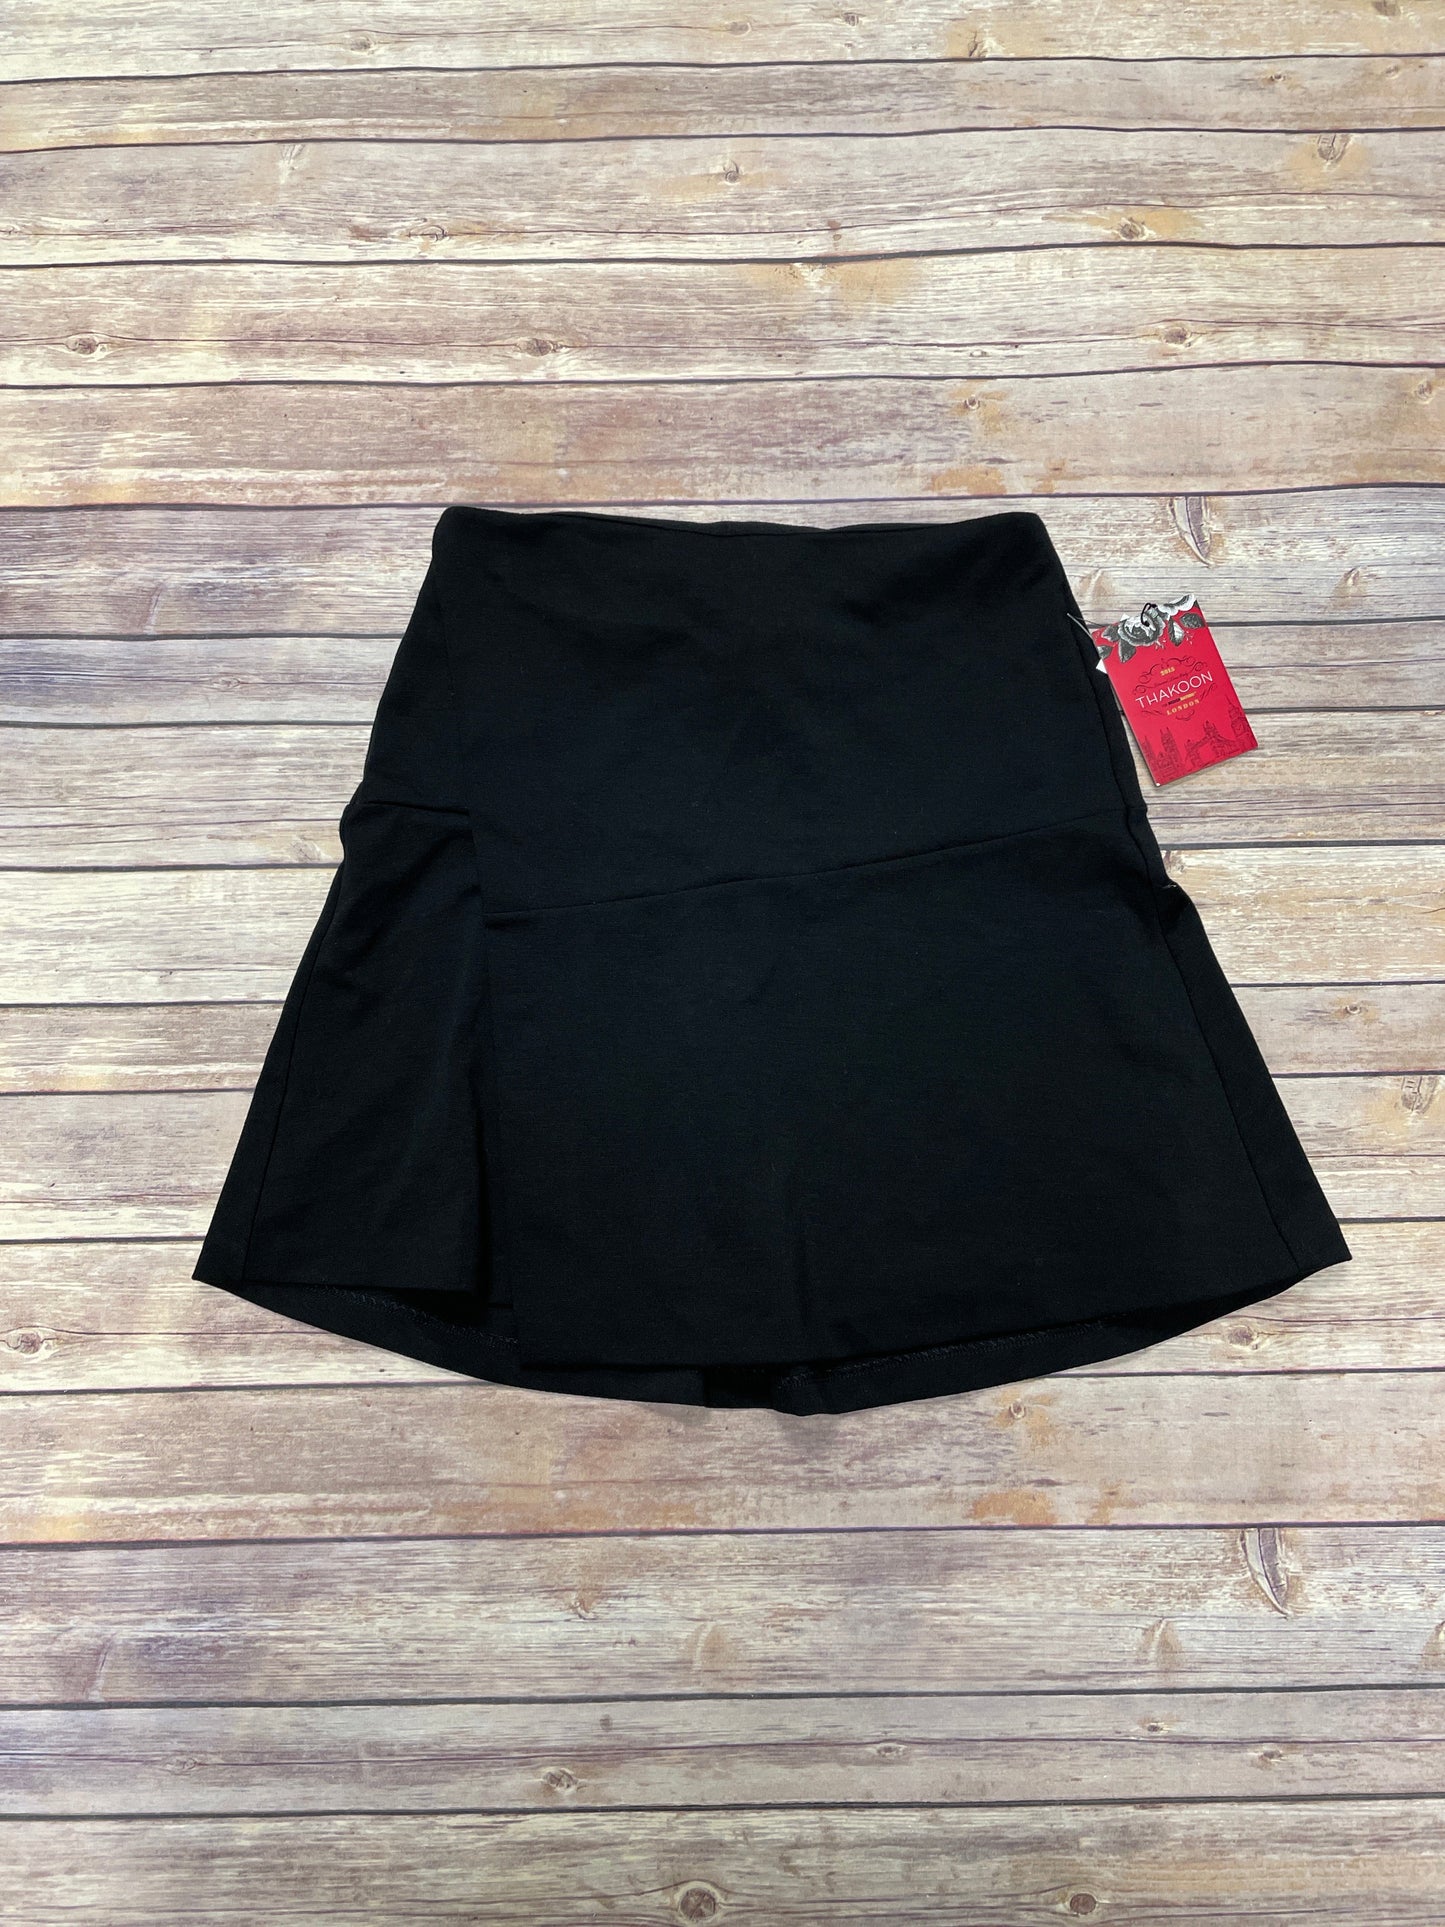 Skirt Mini & Short By Cme  Size: Xs